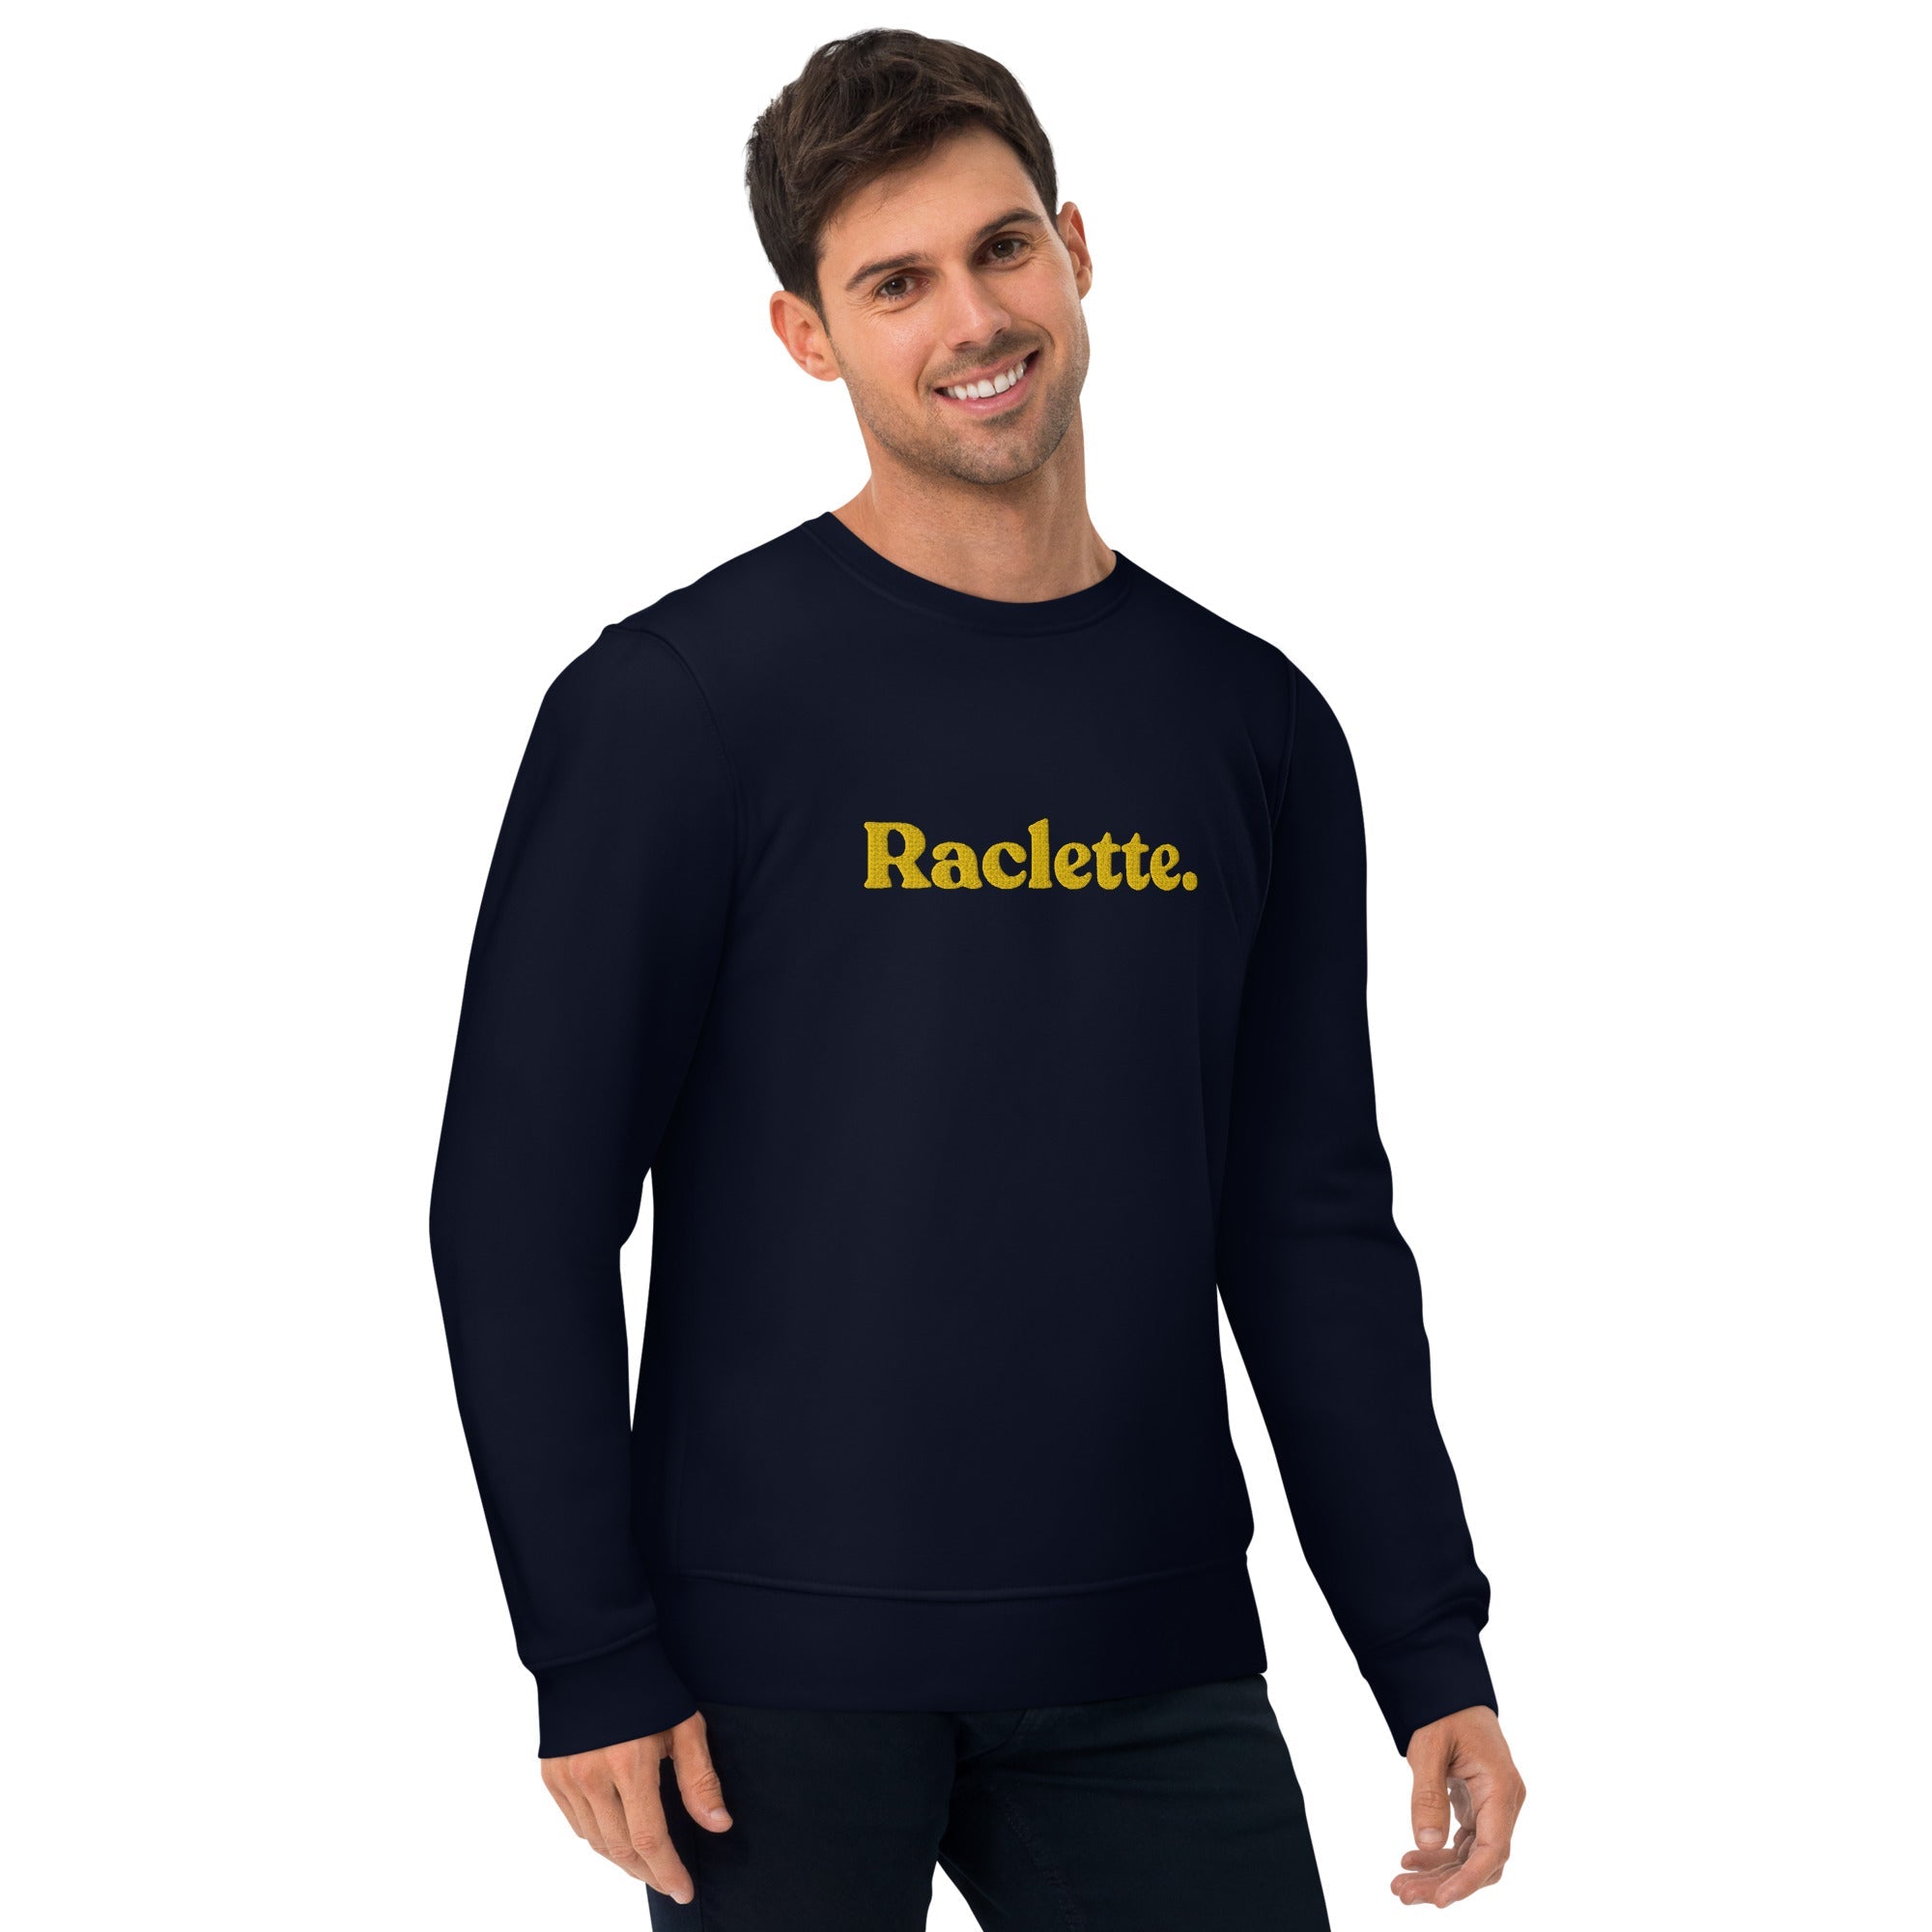 Raclette - Organic Embroidered Sweatshirt - The Refined Spirit